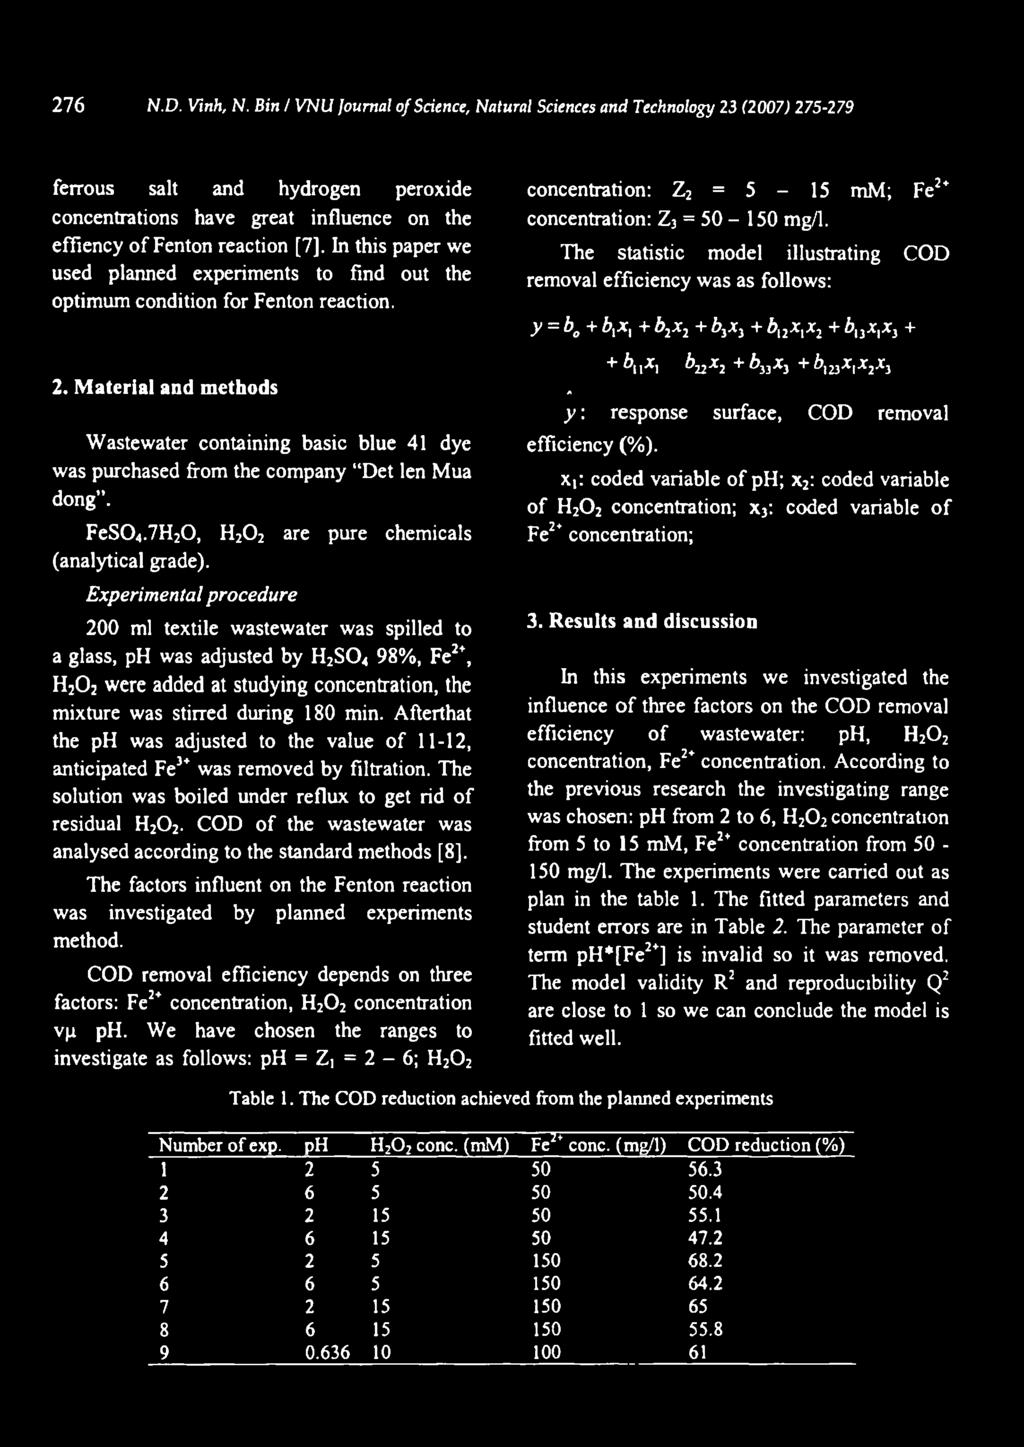 Fenton reaction [7]. In this paper we used planned experiments to fmd out the optimum condition for Fenton reaction. 2.